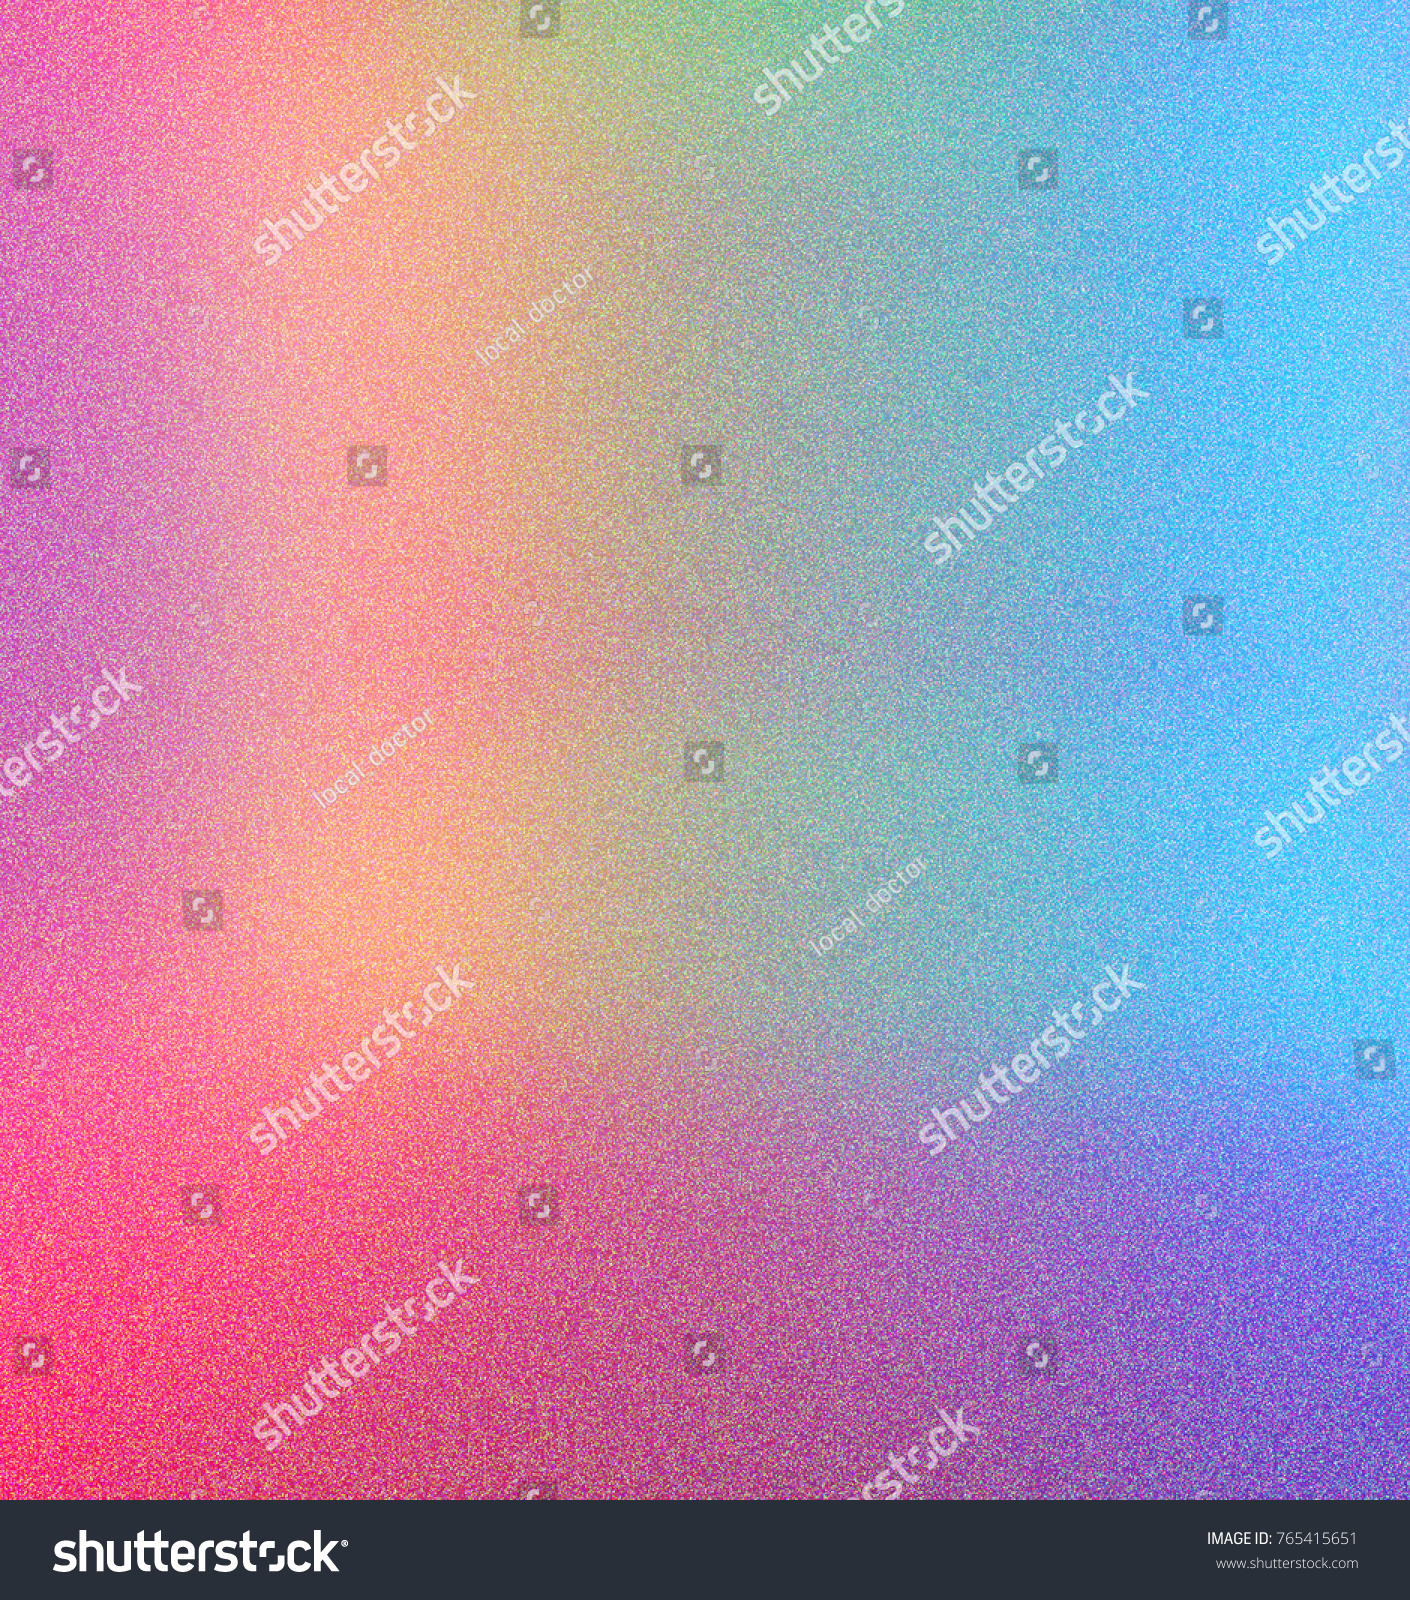 Holographic blurred background with noise effect. #765415651